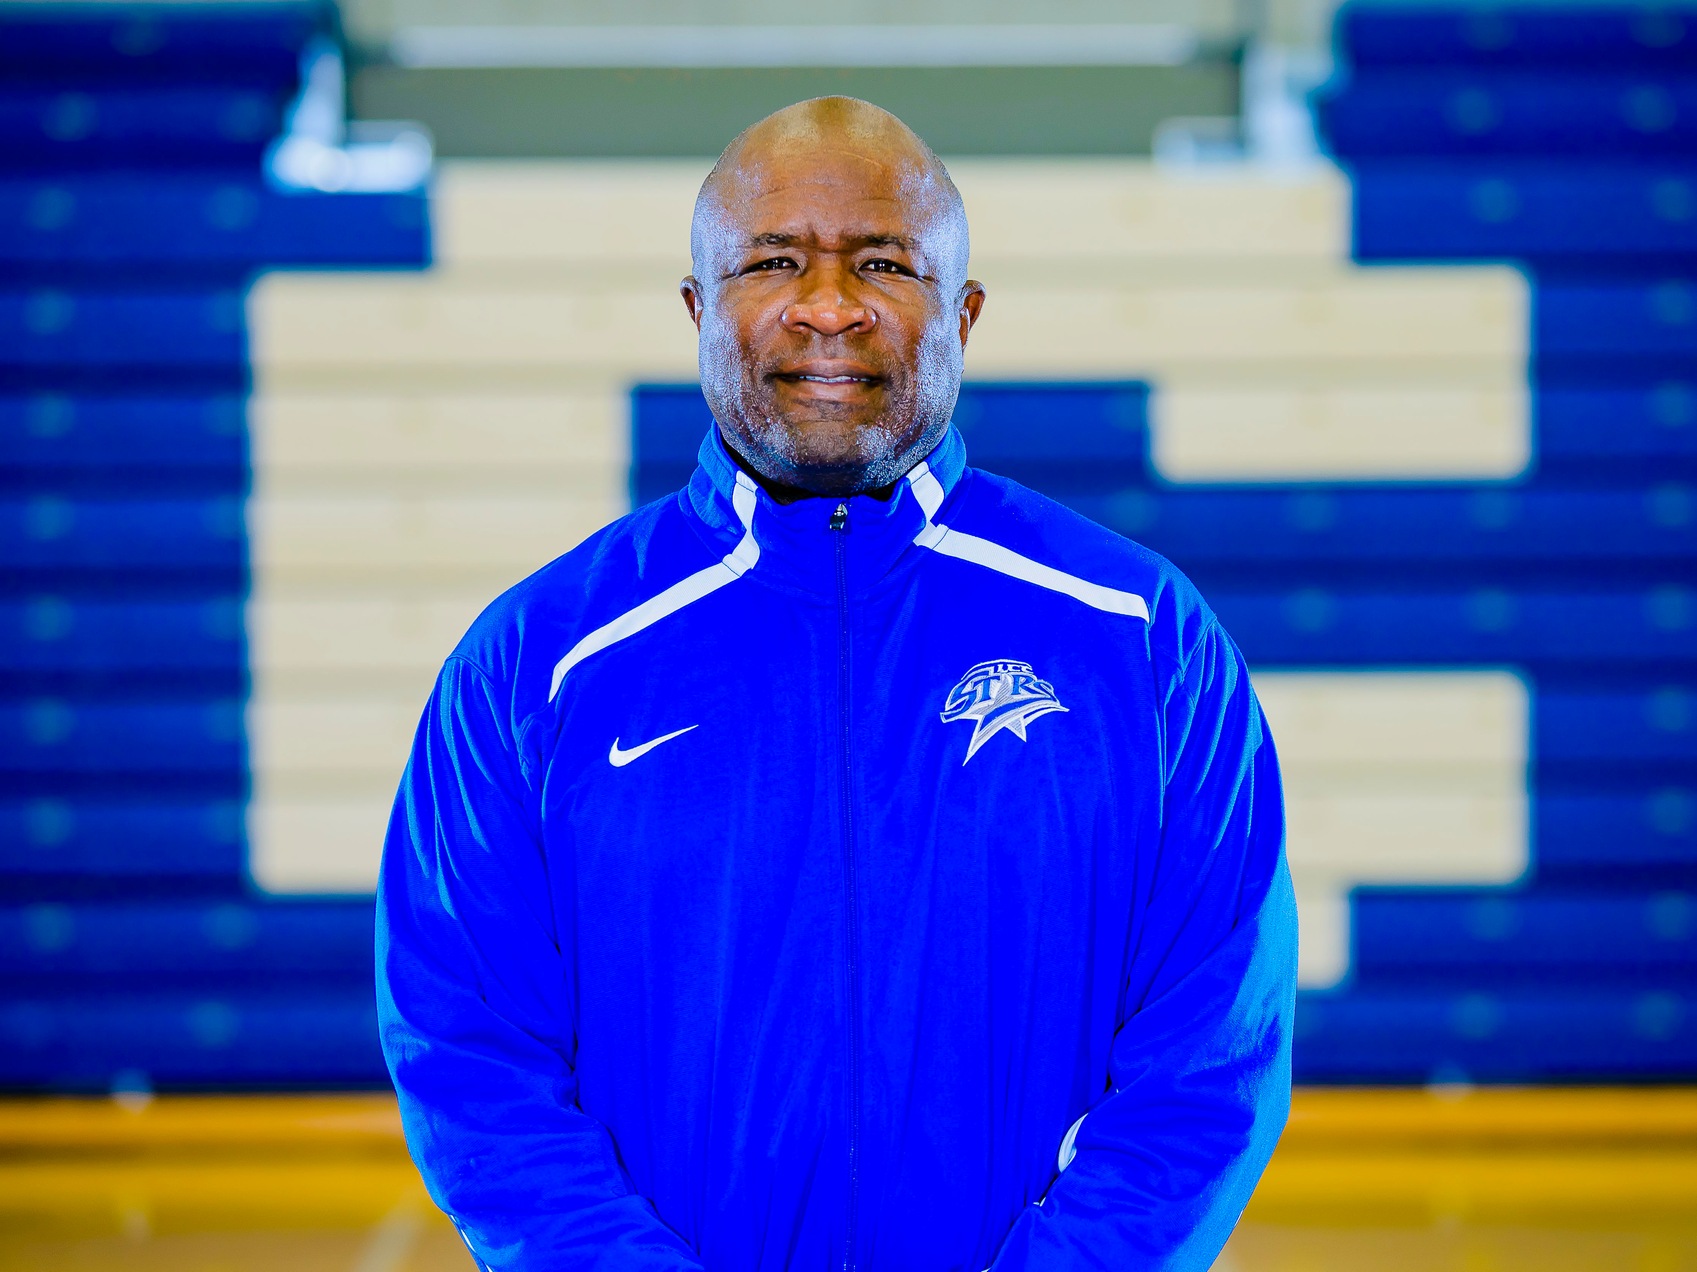 Lansing Community College coach Mike Ingram notches 600th victory: "I've been blessed"